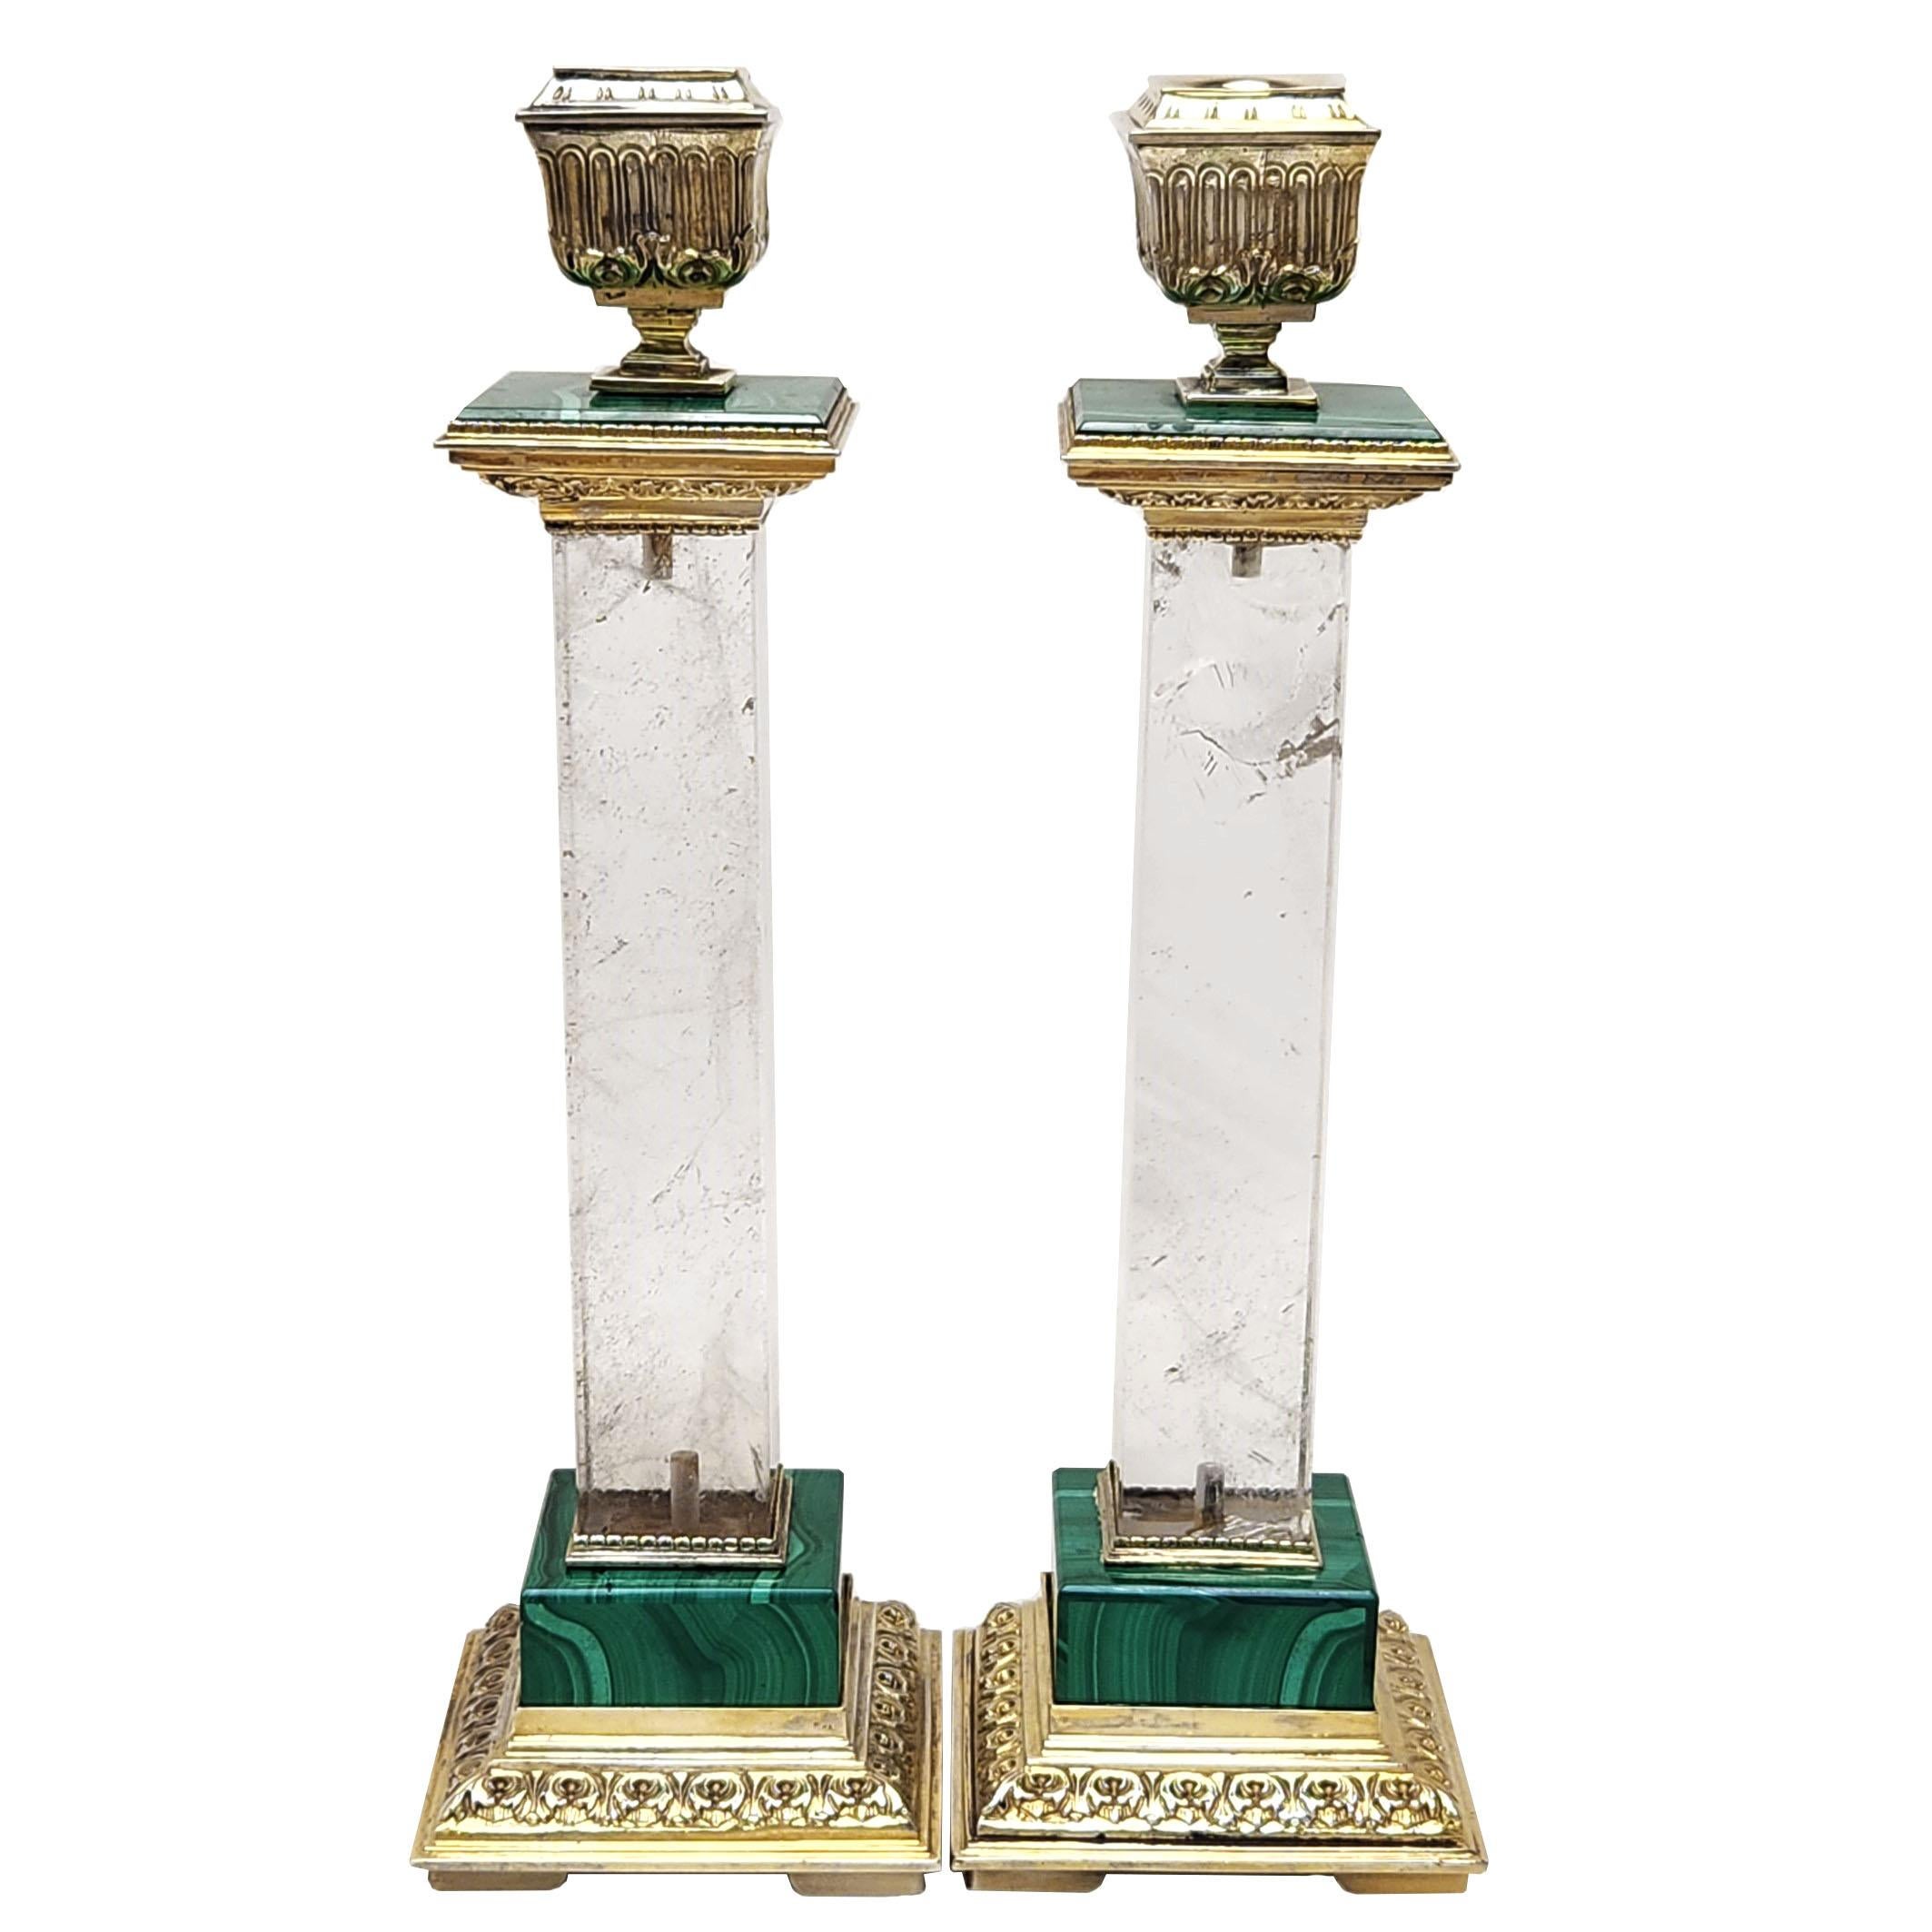 A magnificent pair of rare Italian Silver Gilt mounted Candlesticks with polished rock crystal columns and malachite details on the base and the top of each Candlestick. Each Rock Crystal Column has beautiful natural inclusions contained in the